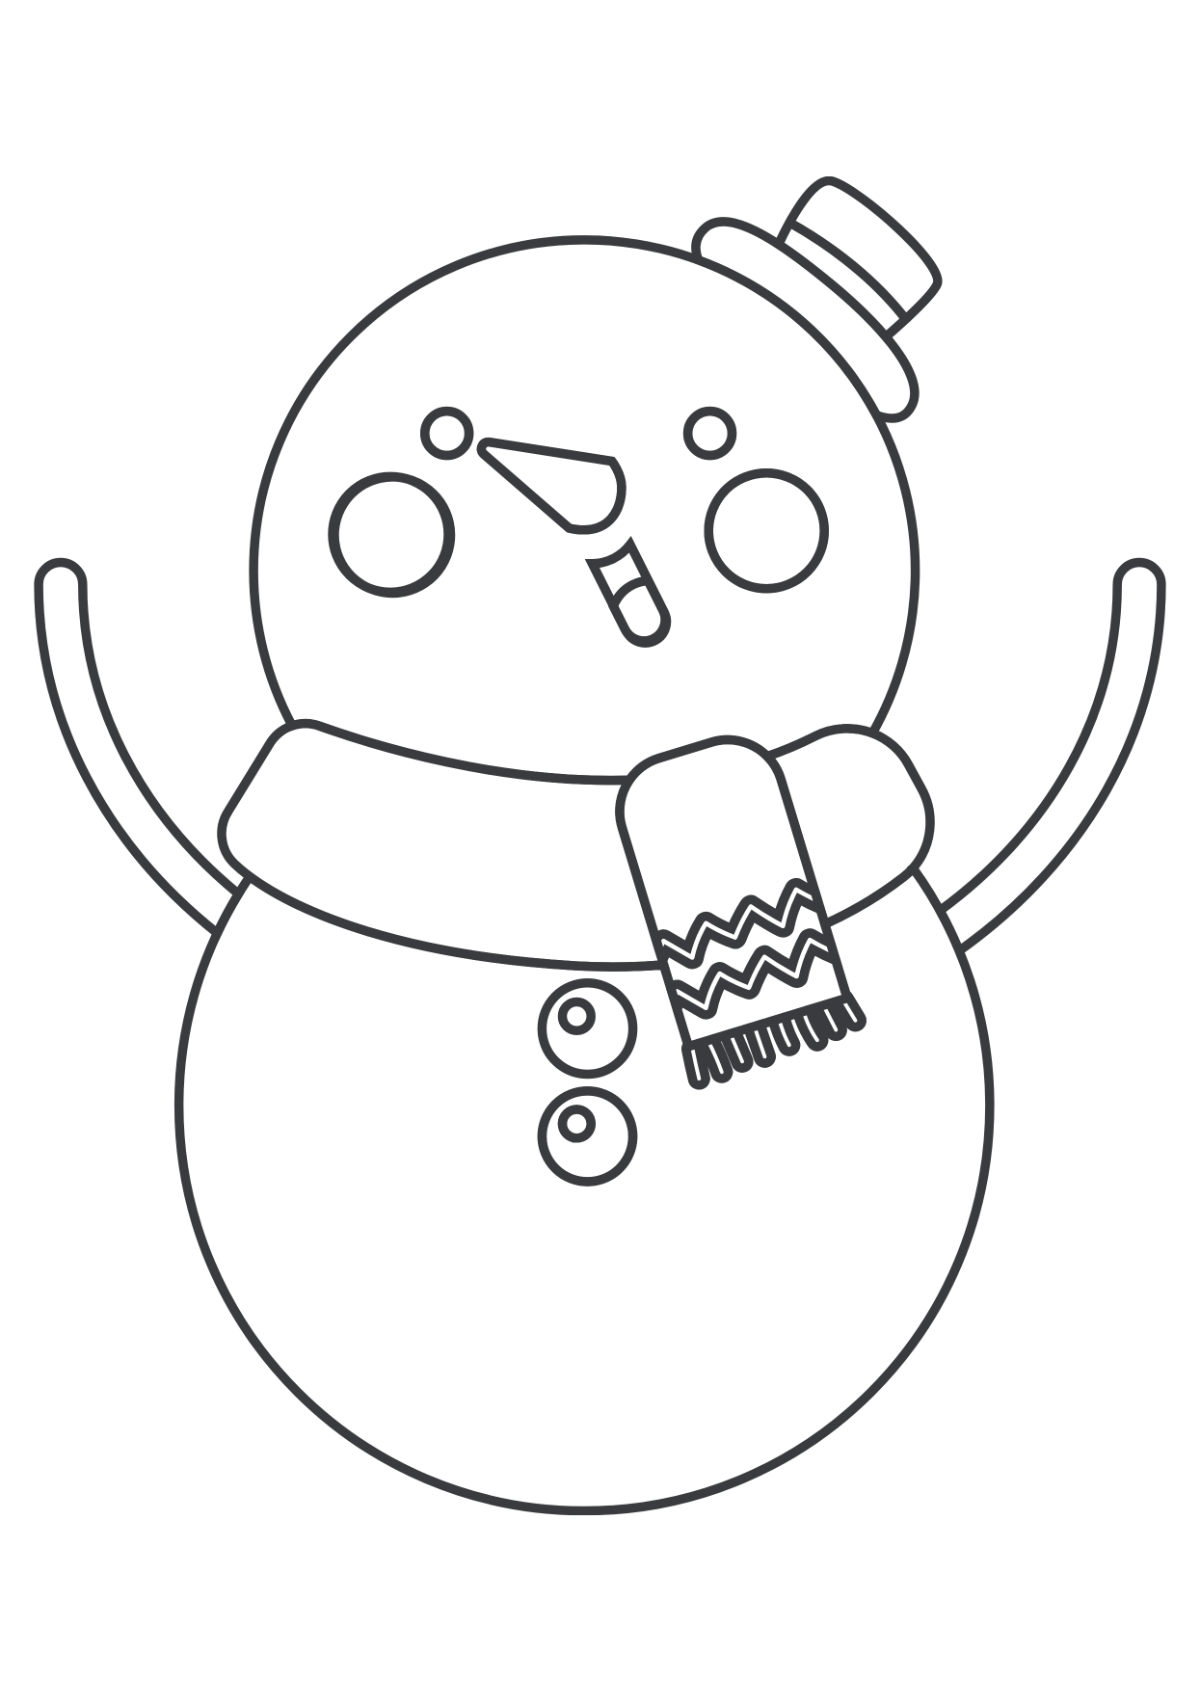 Fun Christmas and Winter Coloring Pages for Kids – Chalk Academy